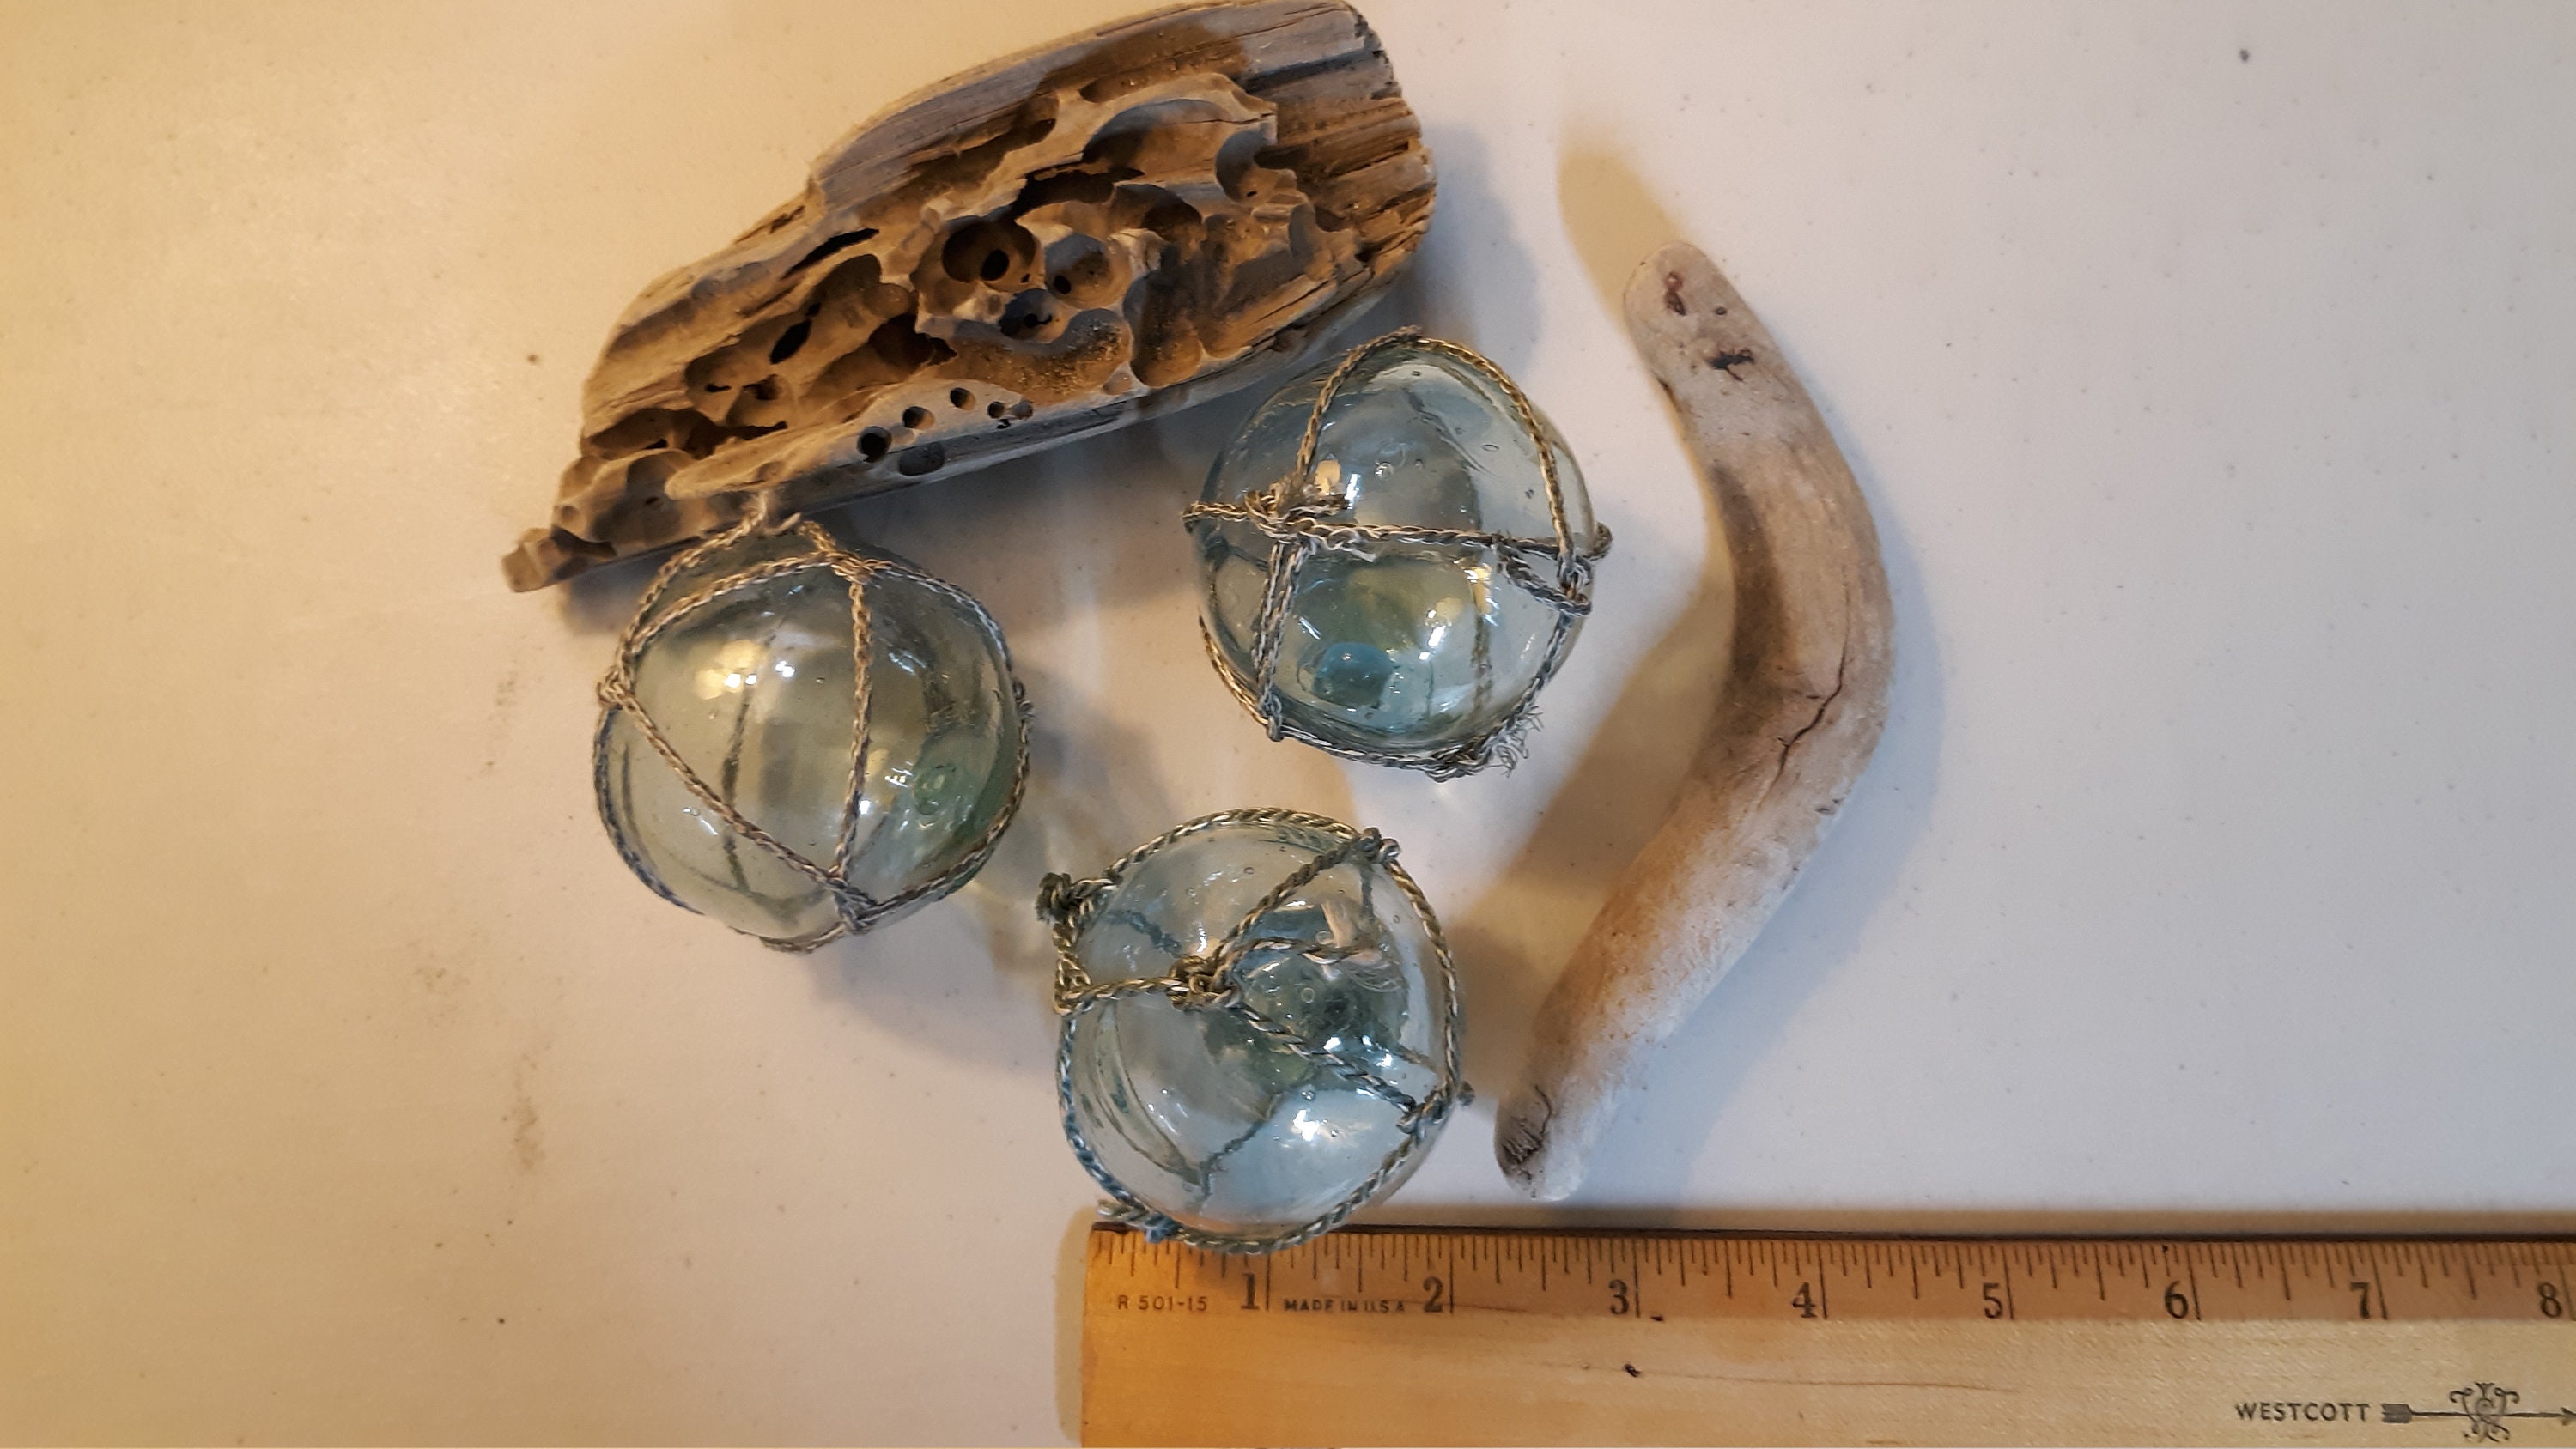 Group of 3 Tiny Authentic Japanese Glass Fishing Floats, 2.25